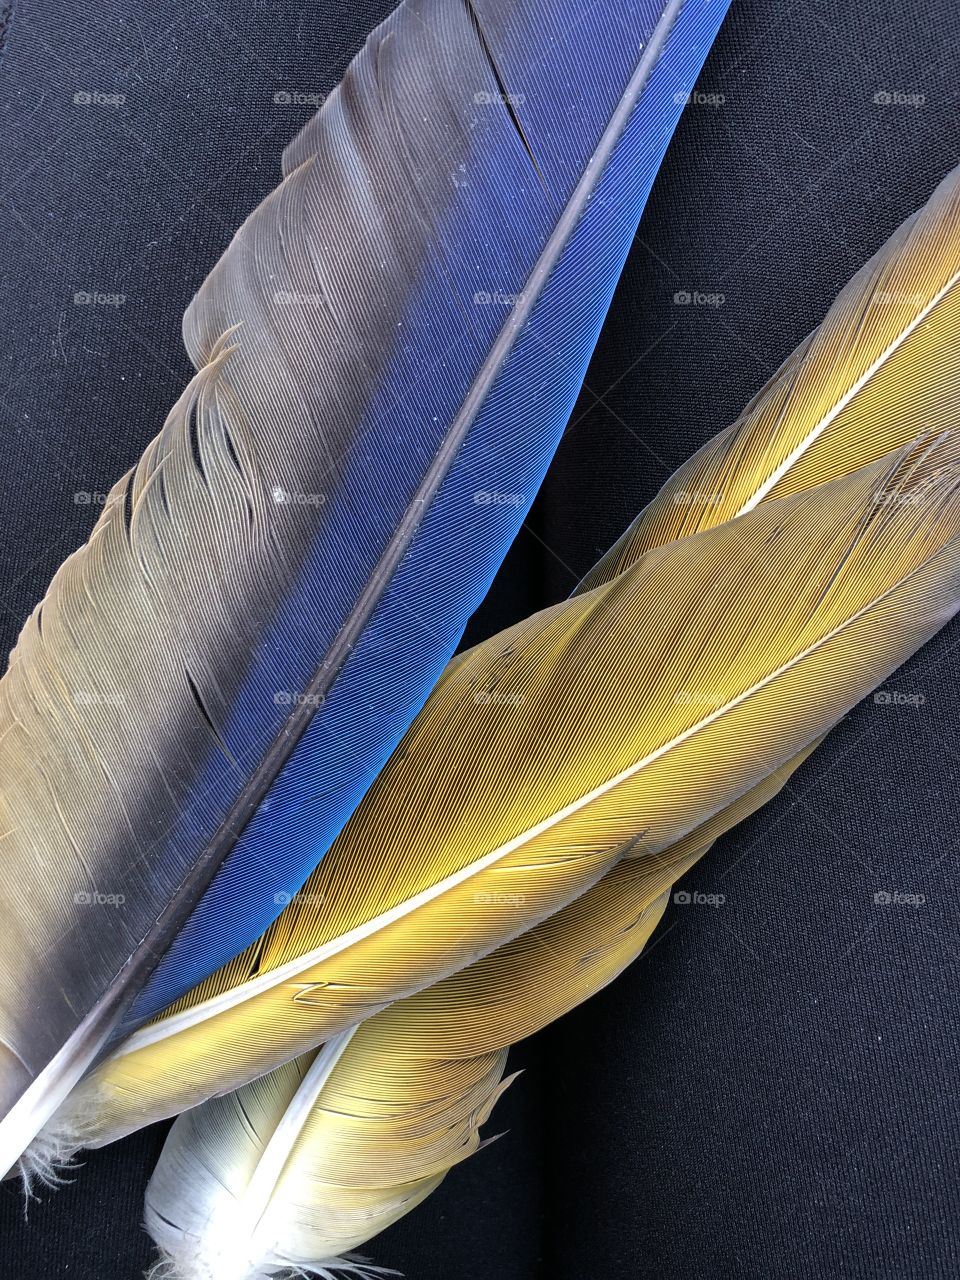 Blue and yellow wings of a macaw parrot